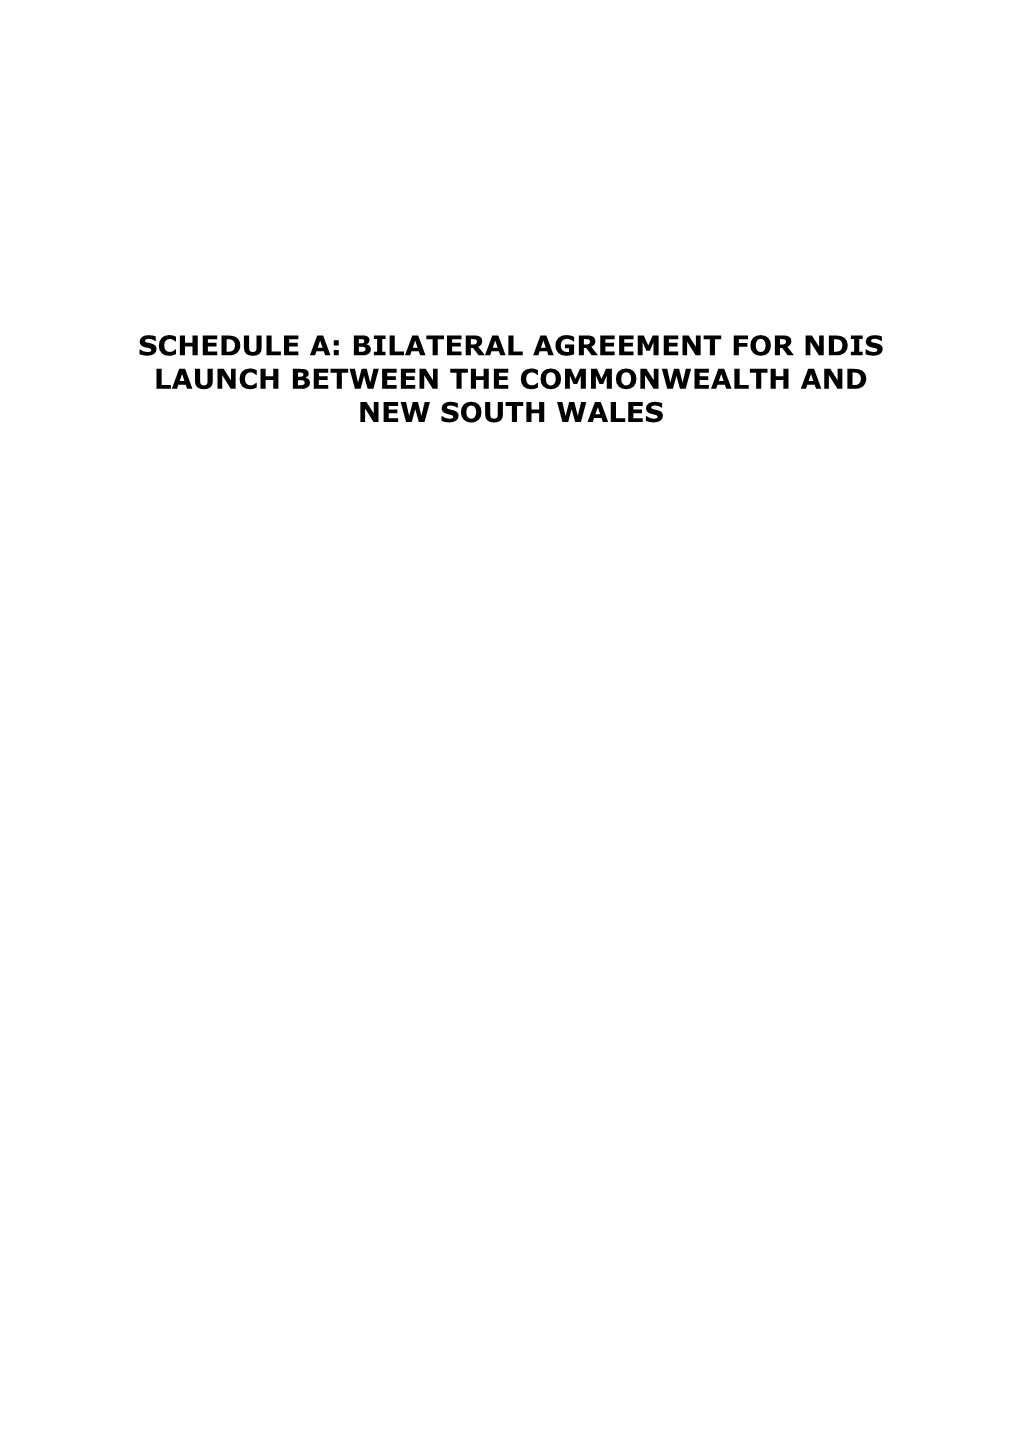 Schedule A:Bilateral Agreement Forndis Launch Between the Commonwealth and New South Wales